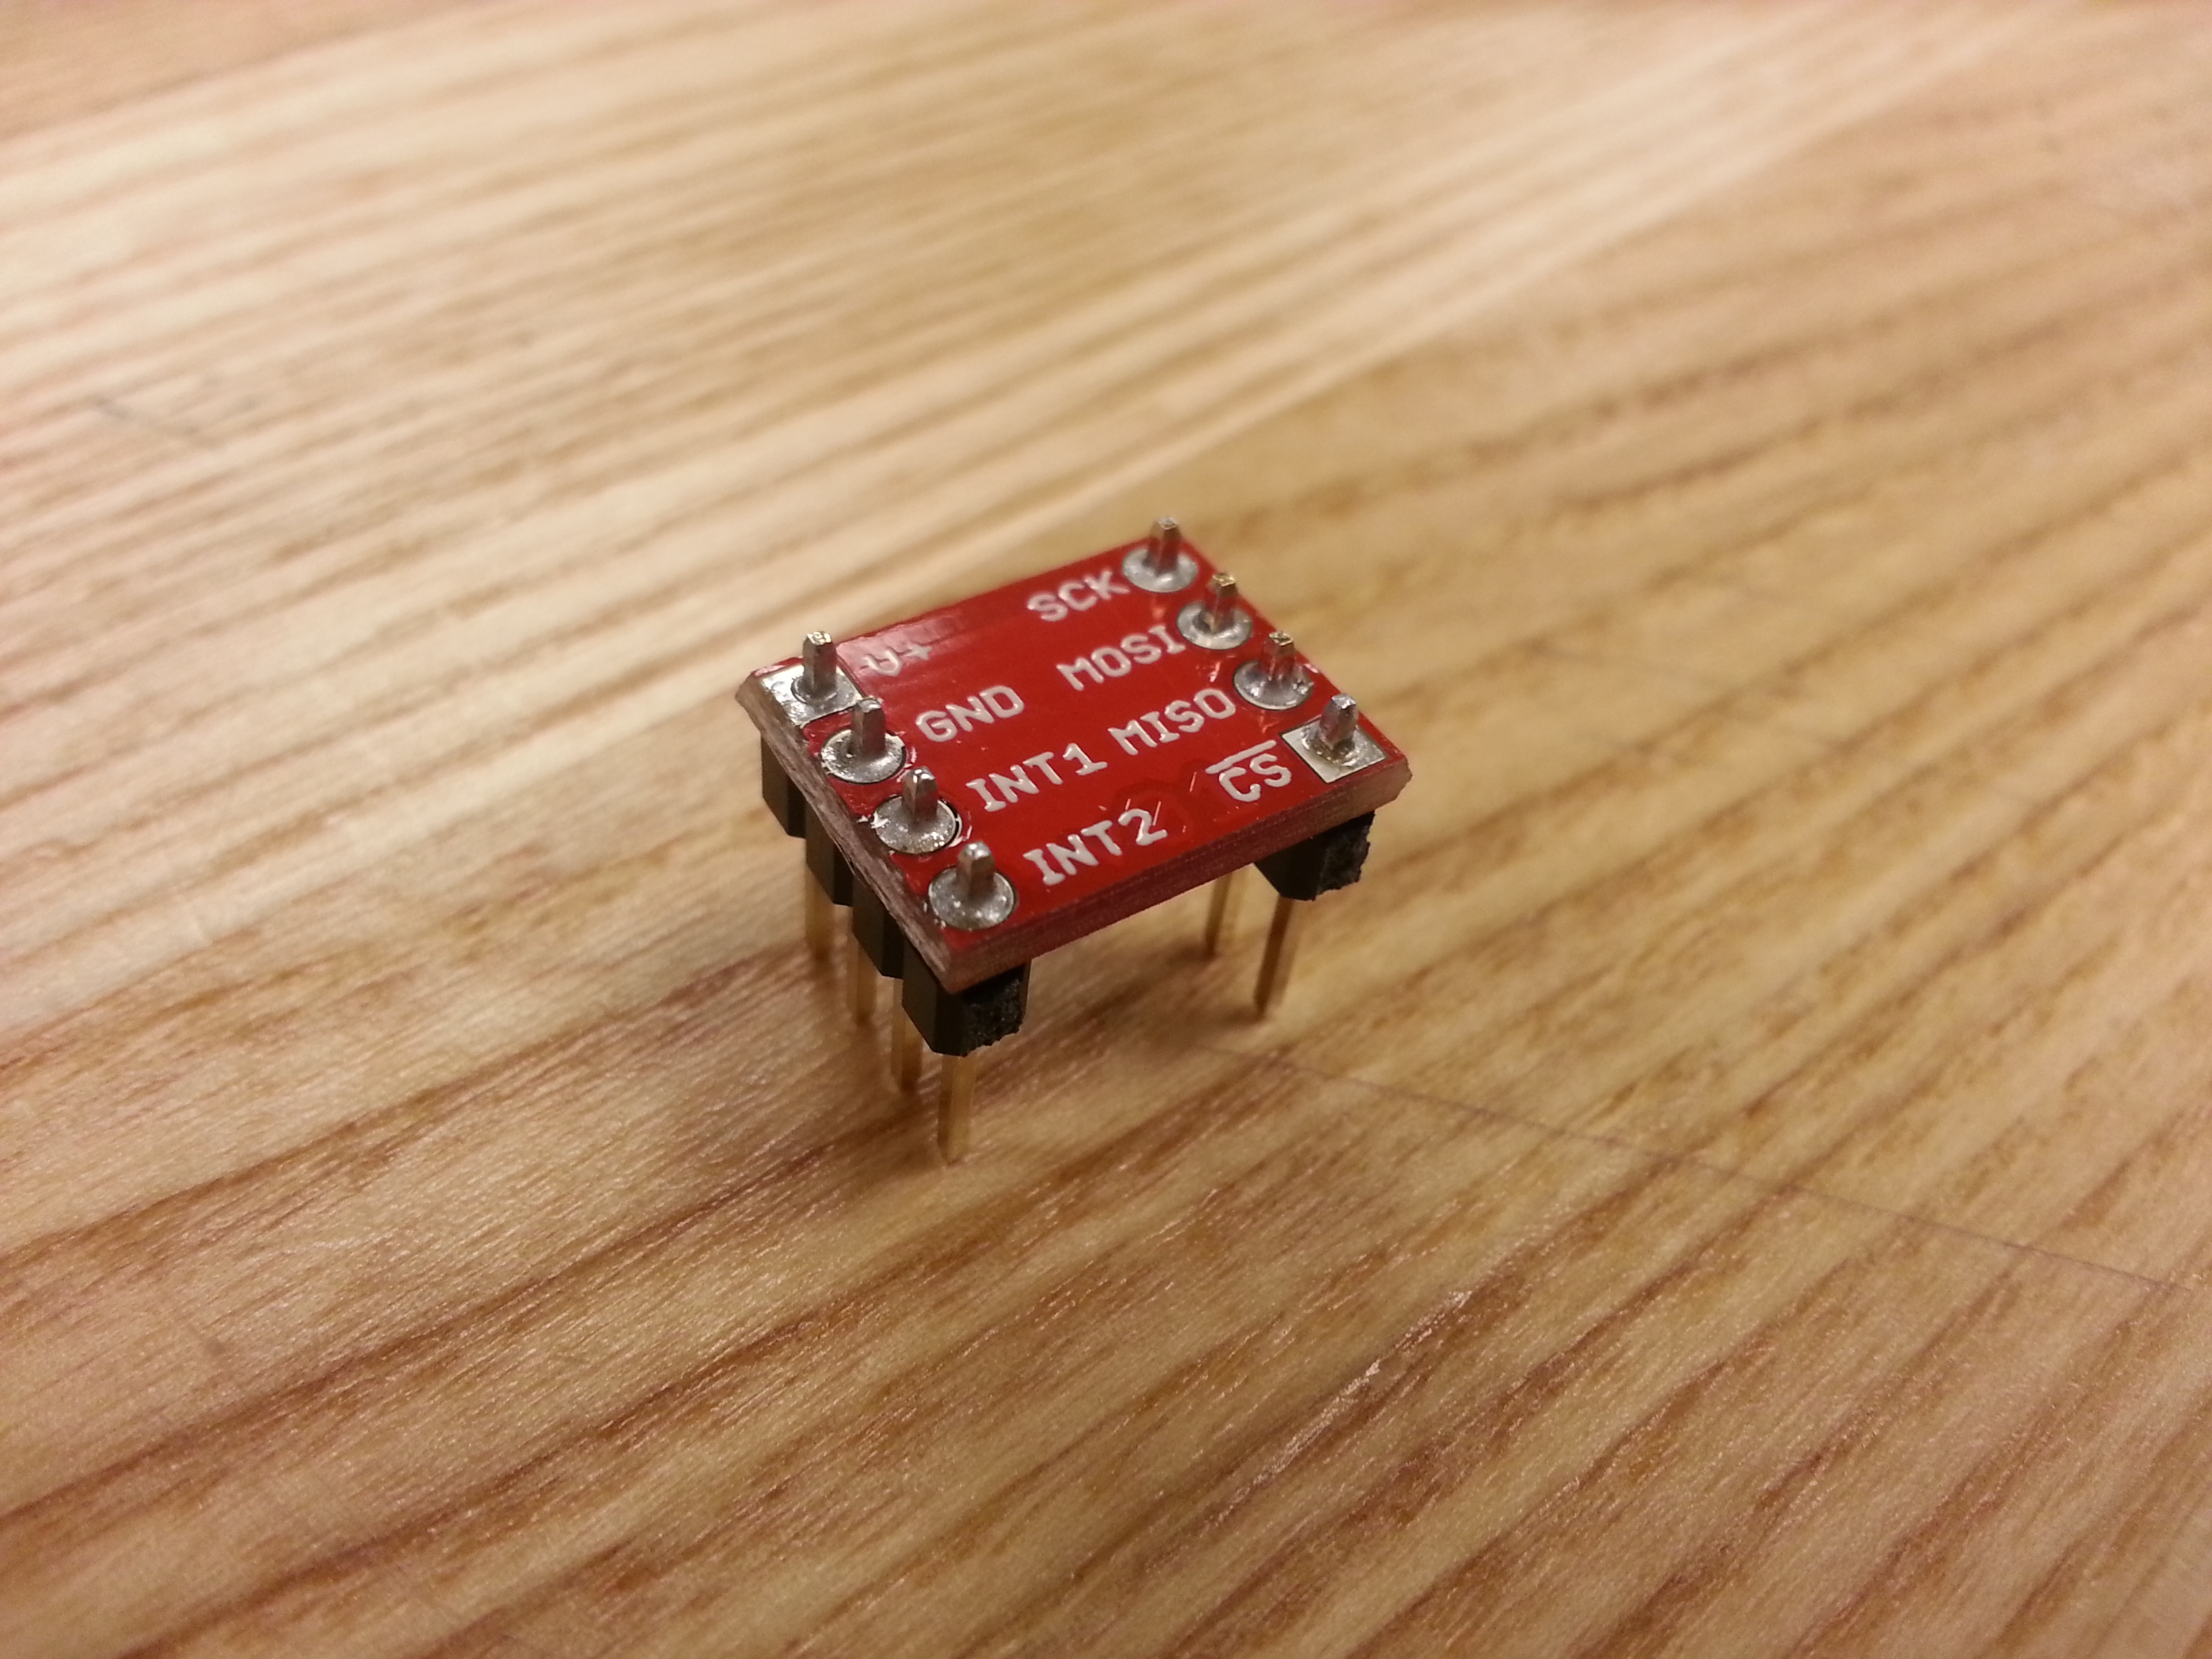 The accelerometer after it has been soldered